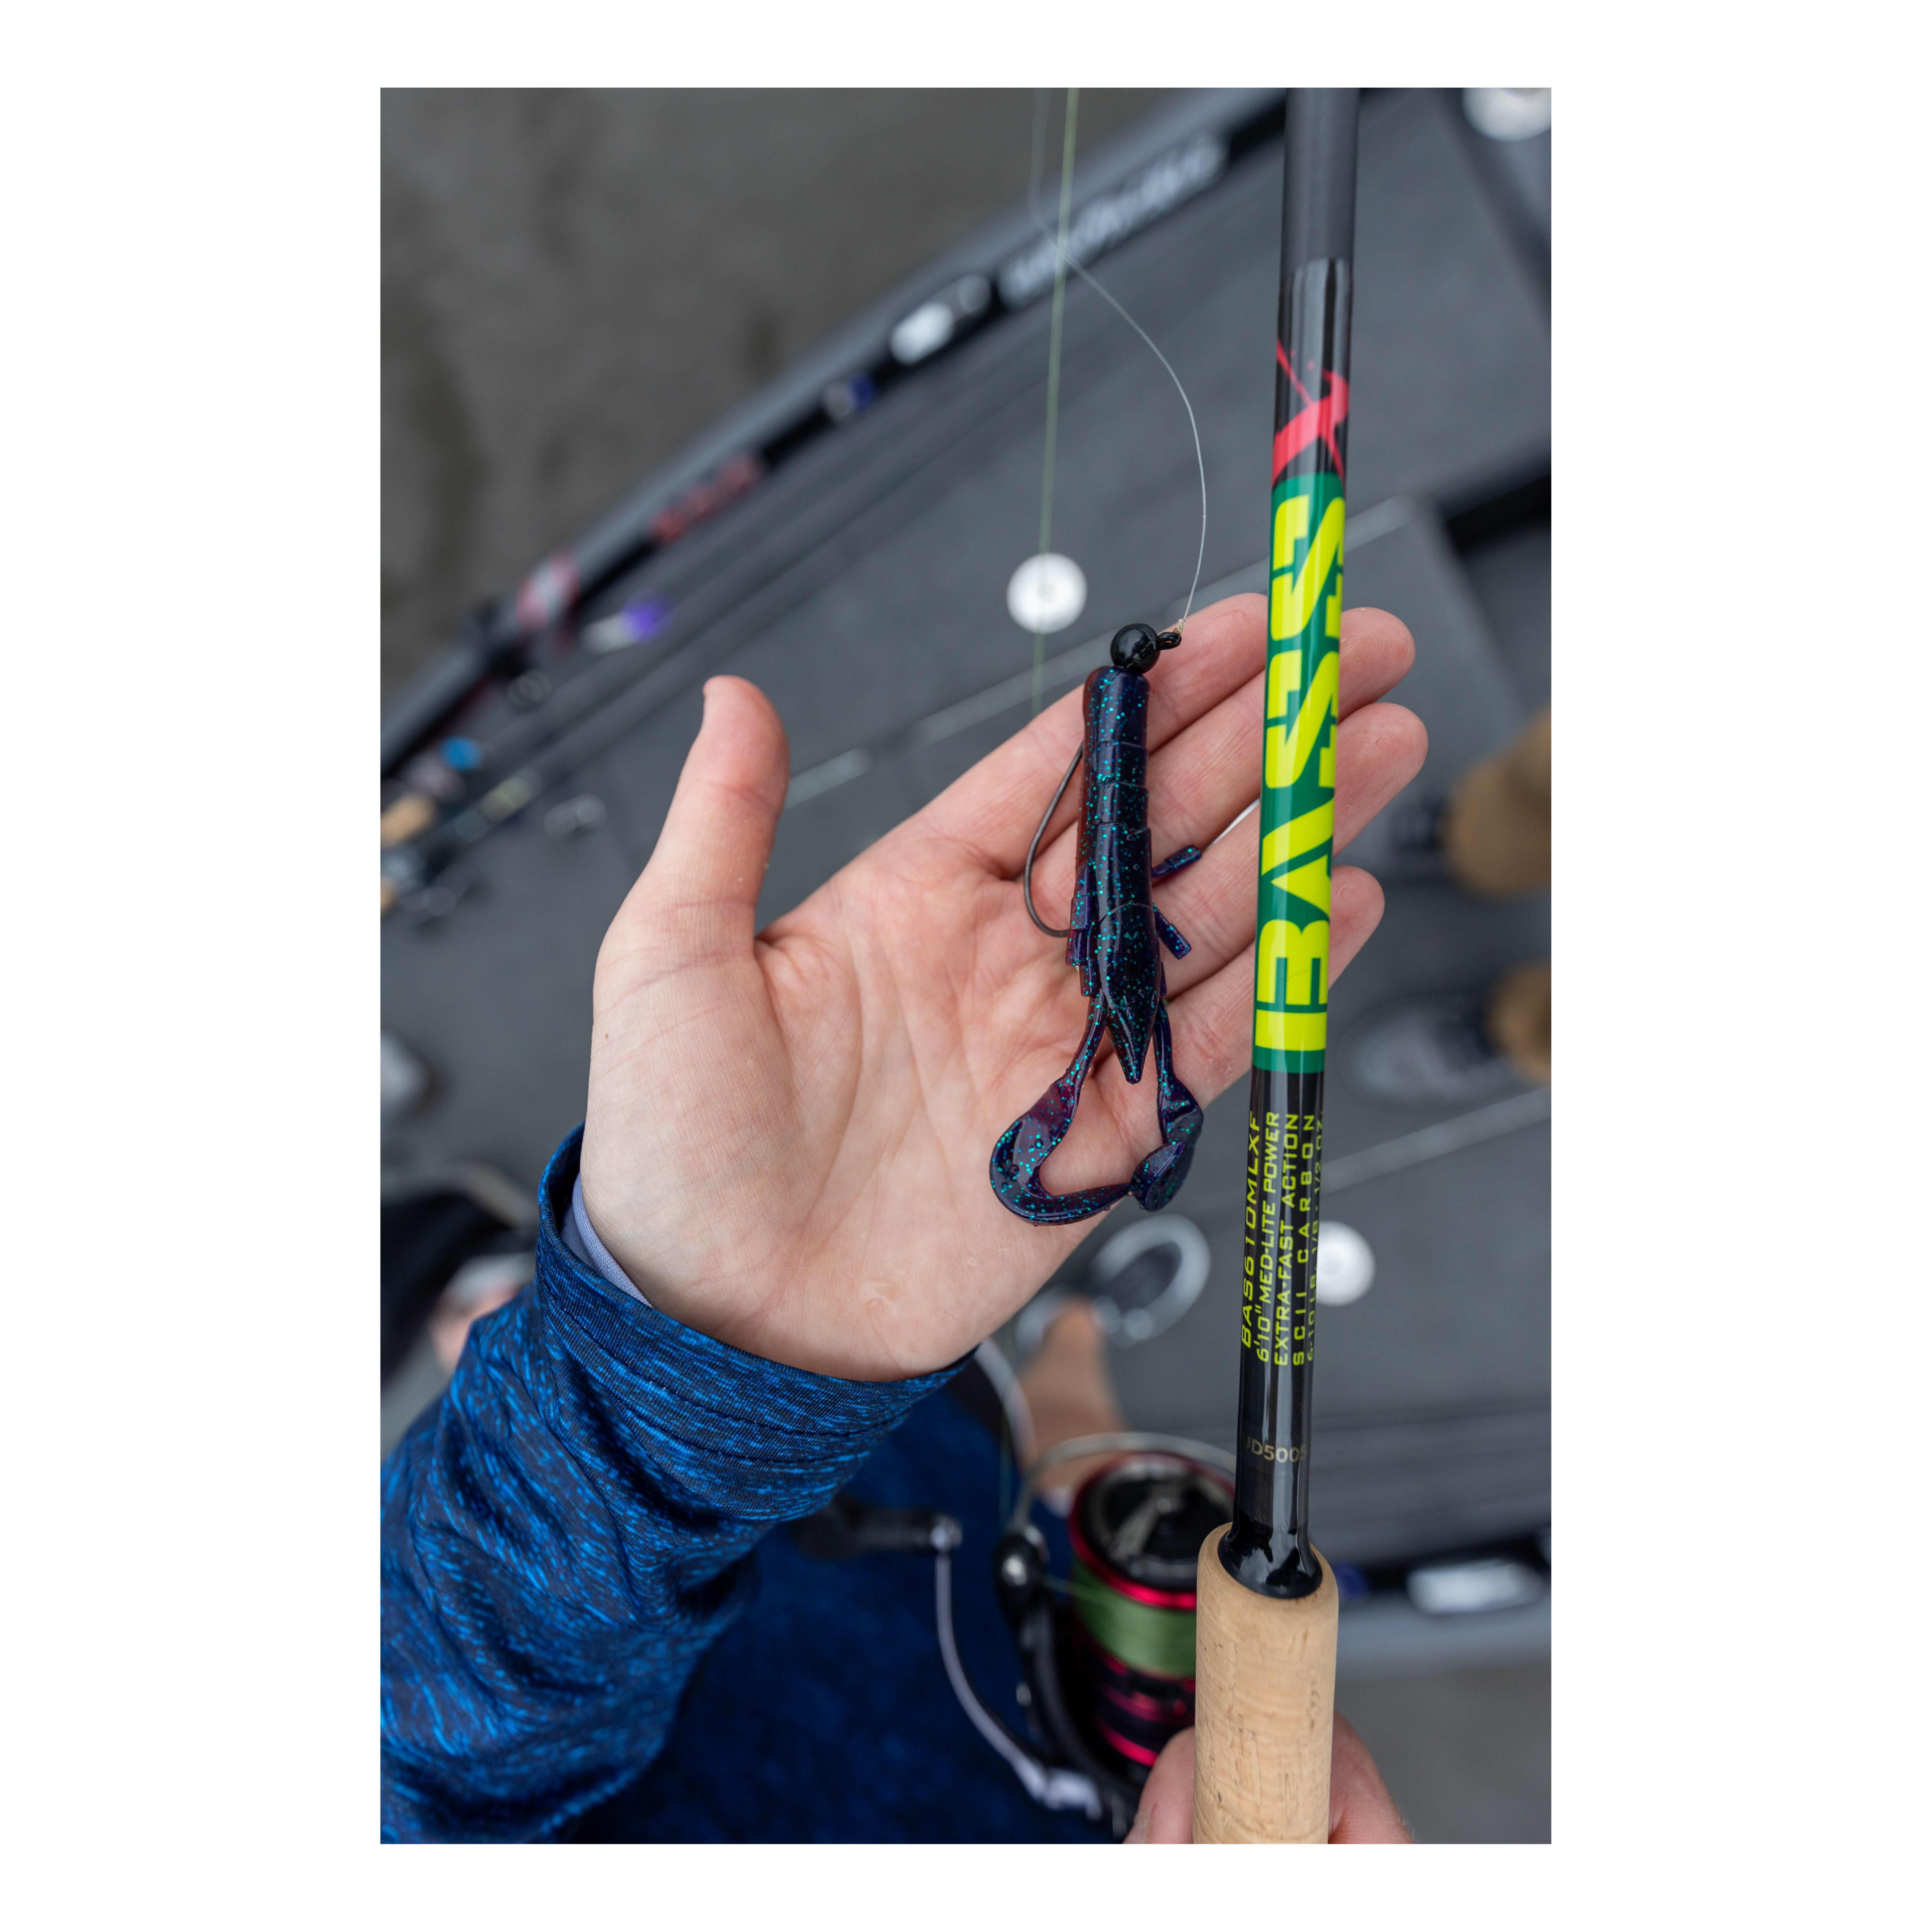 St. Croix® BassX Spinning Rods